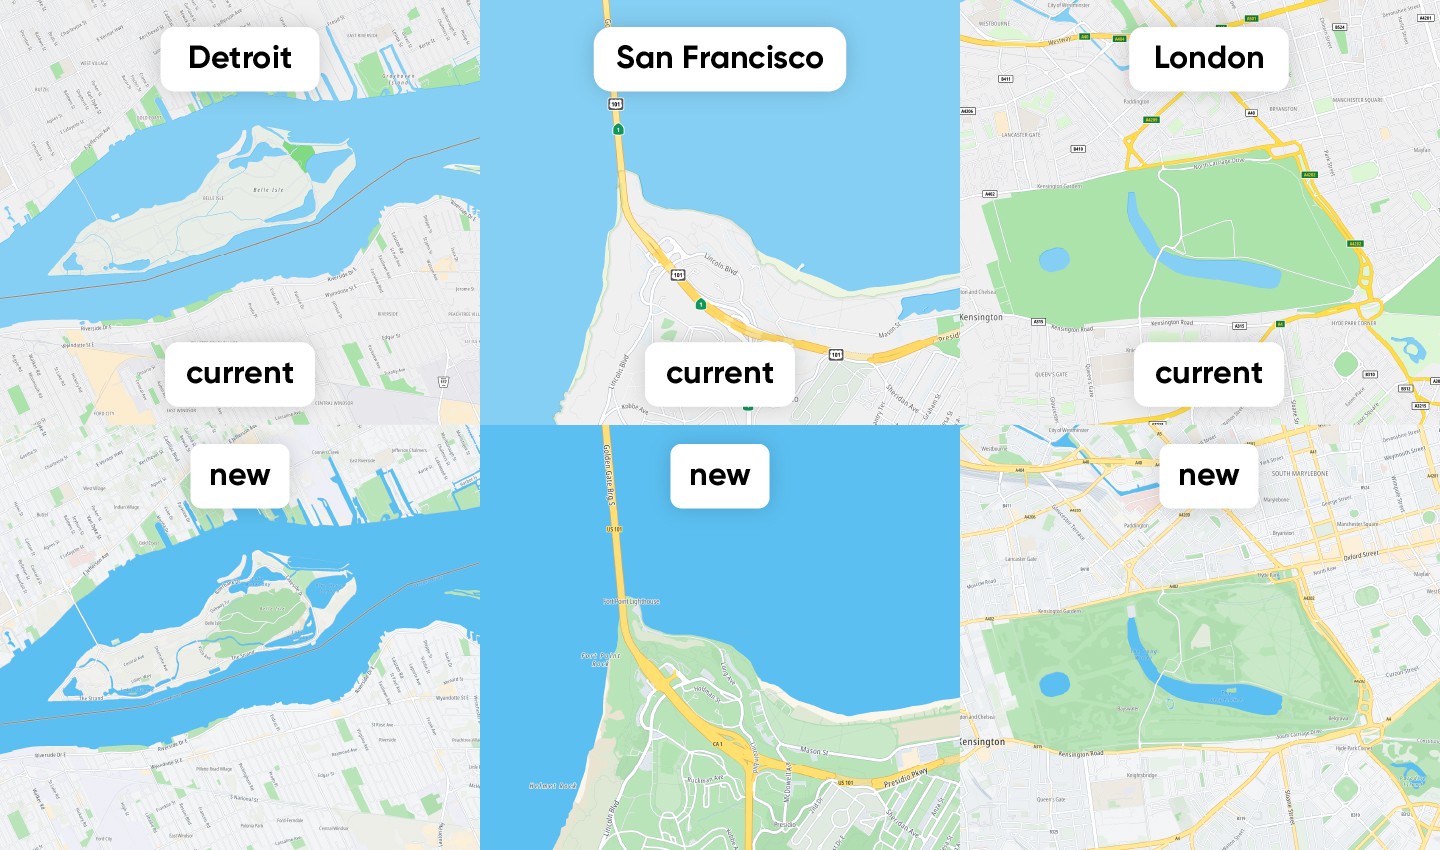 The images above show comparisons between TomTom’s current map and the map generated by the new TomTom Orbis Maps.